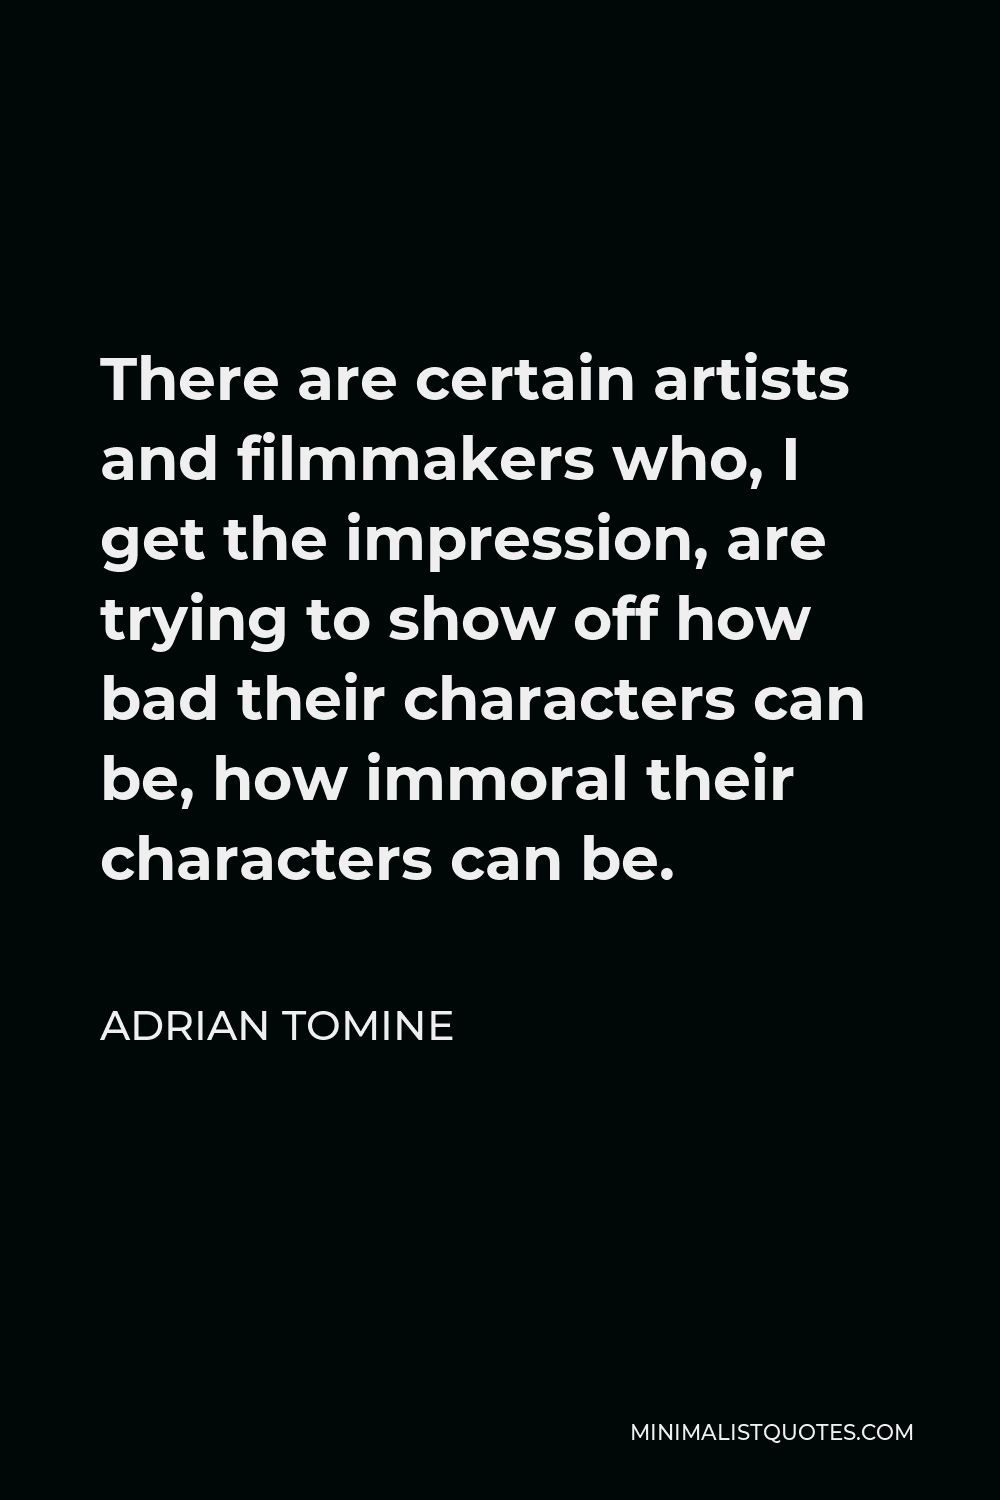 Adrian Tomine Quote - There are certain artists and filmmakers who, I get the impression, are trying to show off how bad their characters can be, how immoral their characters can be.